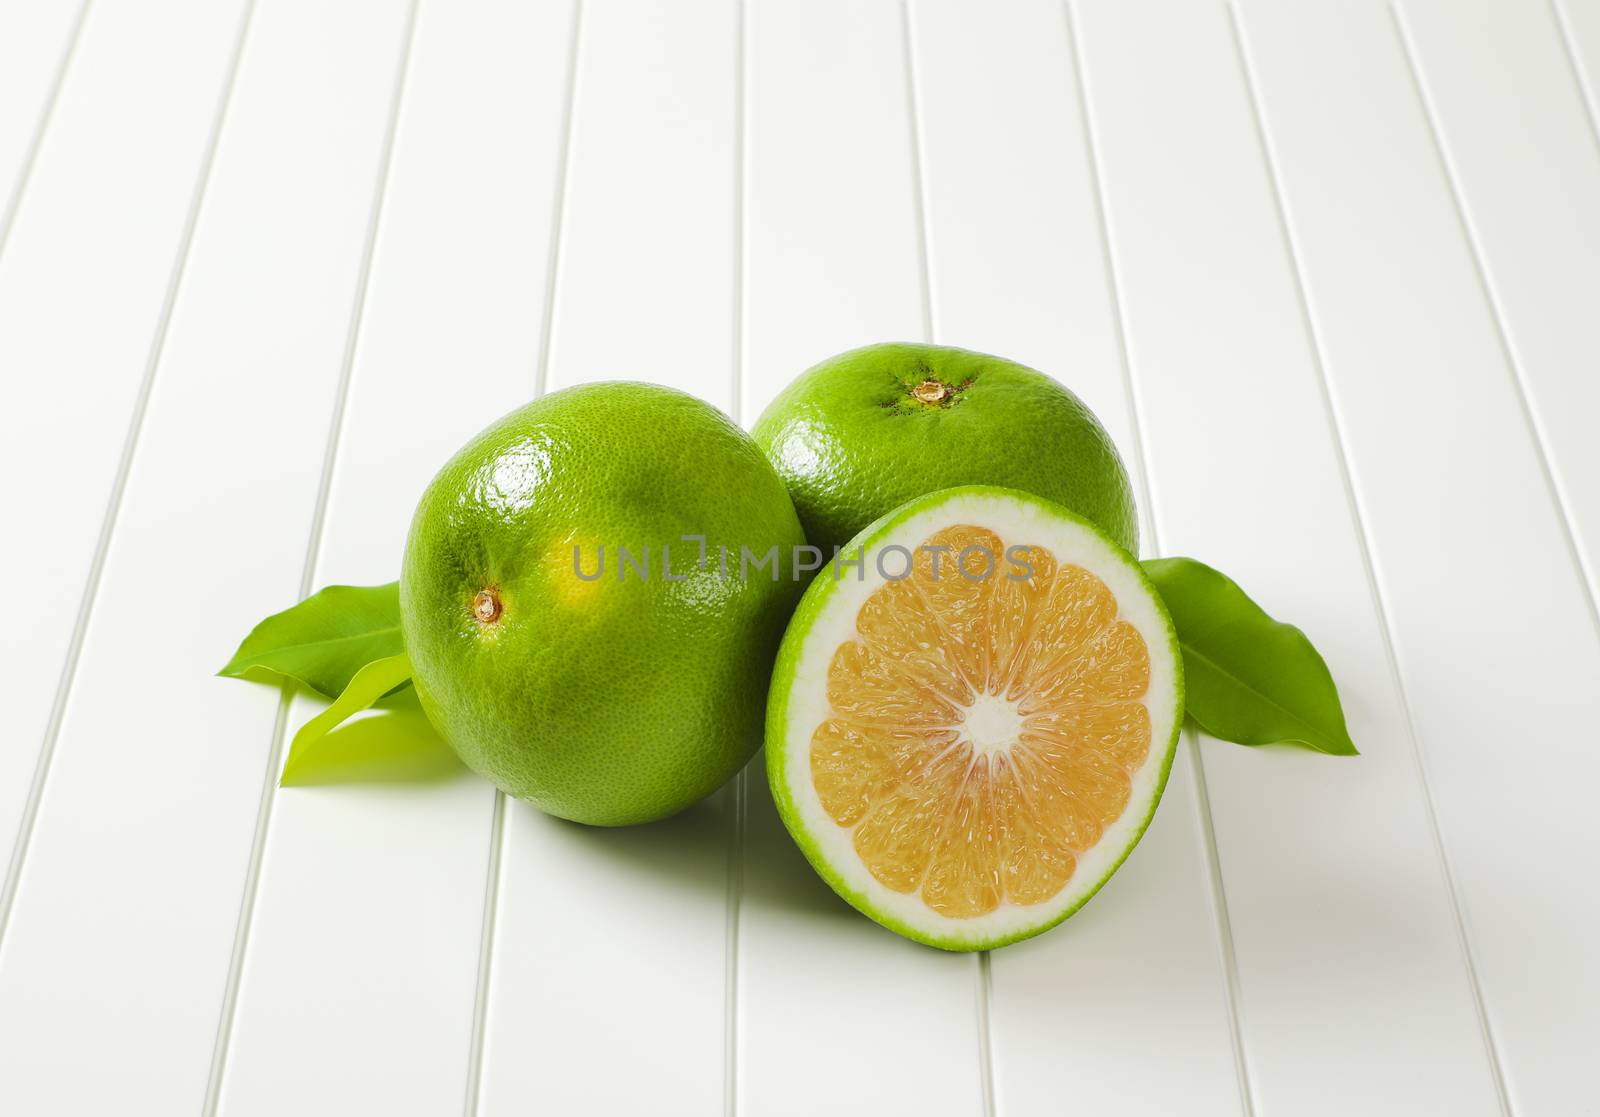 Sweetie fruits (green grapefruits, pomelits) by Digifoodstock